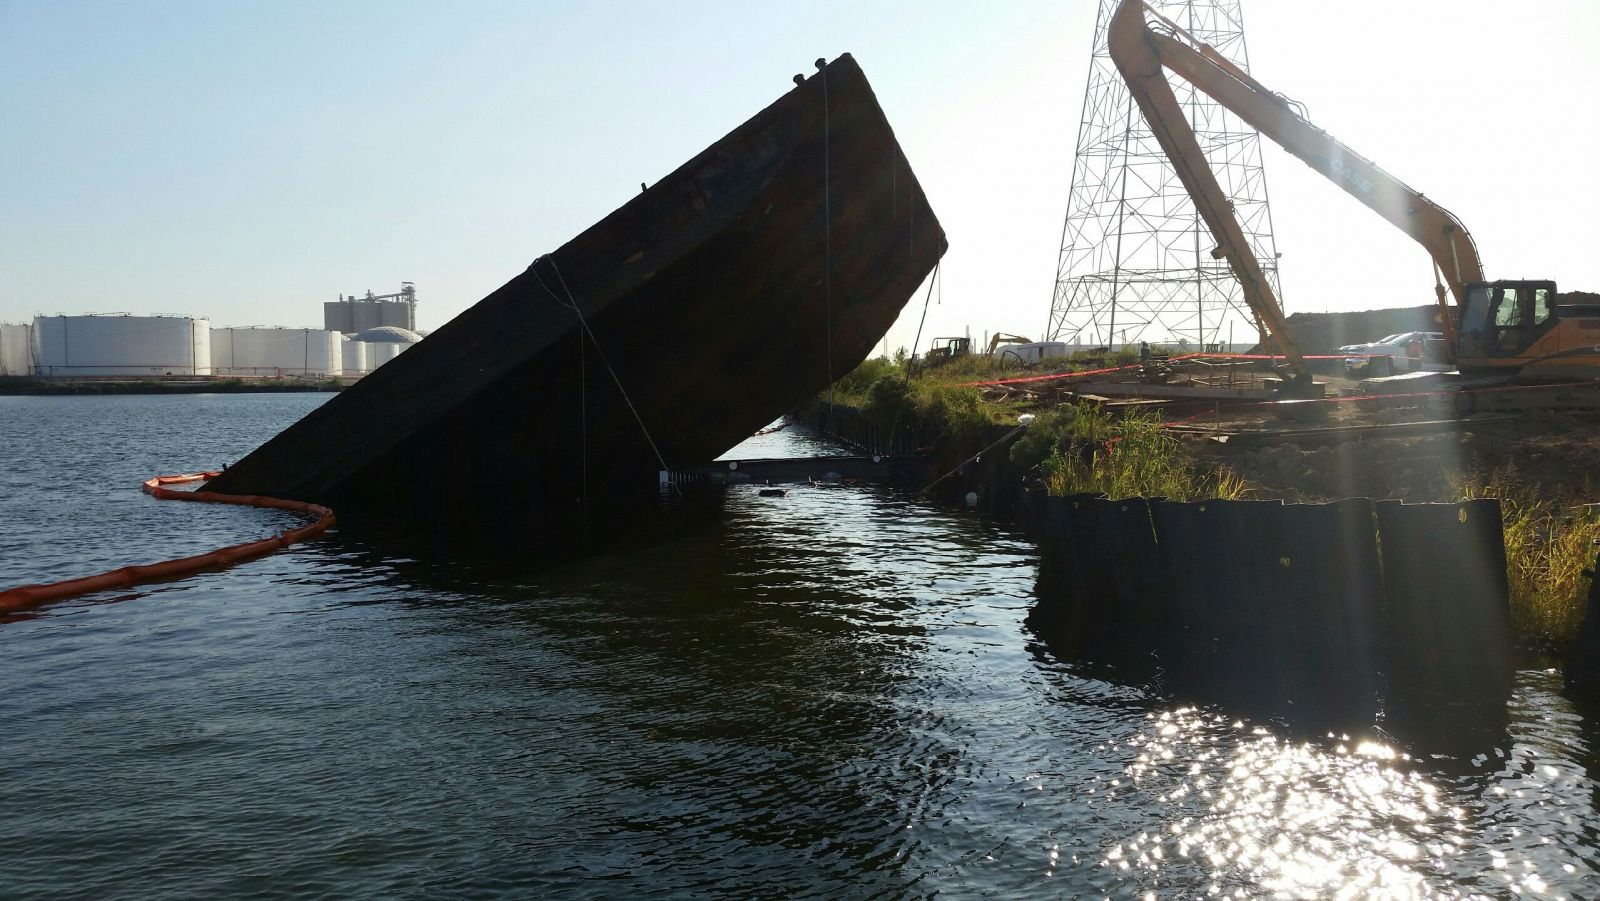 Tug Barge Sinks In Houston Ship Channel